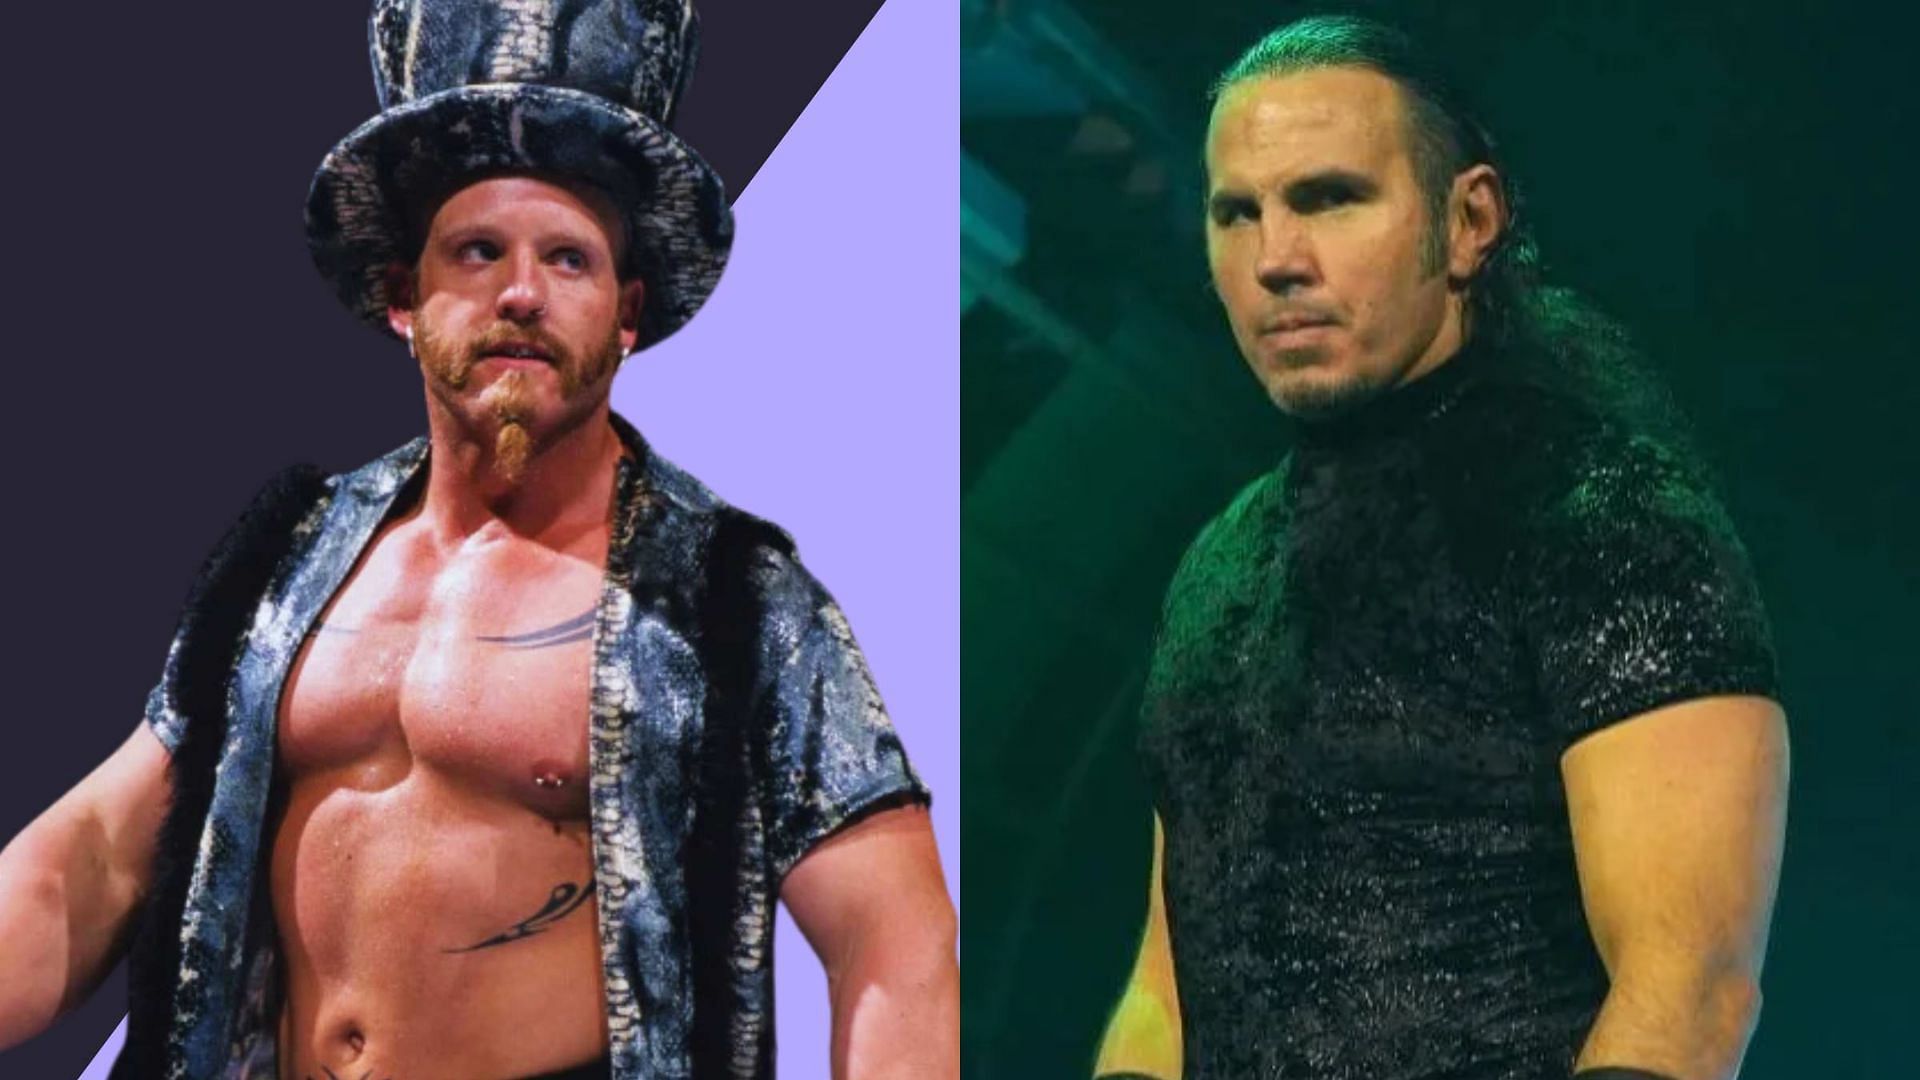 What does Matt Hardy recall from the night that changed Droz